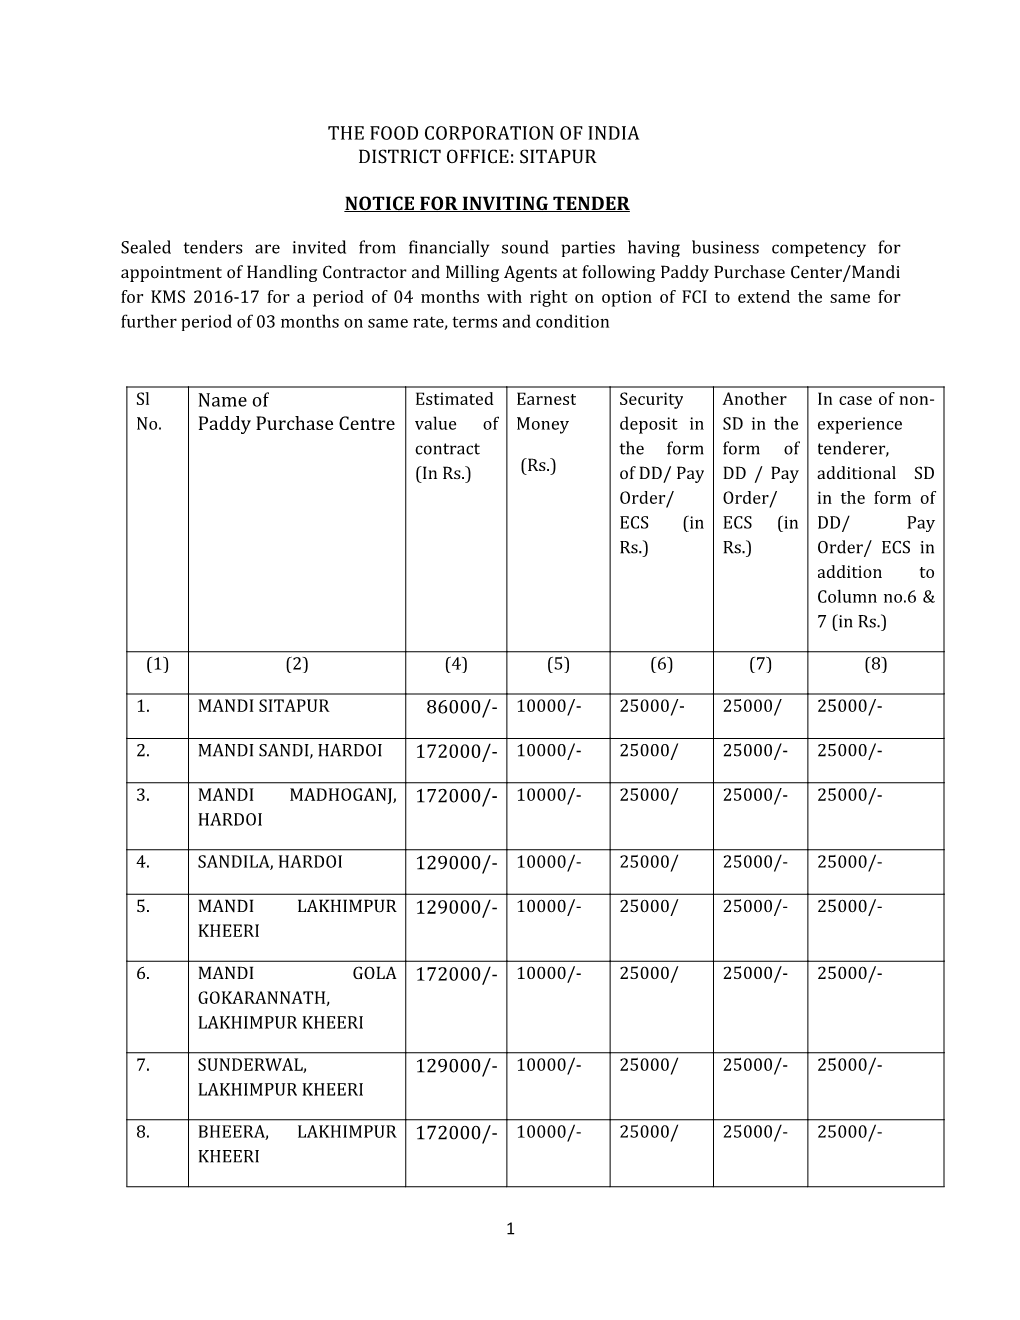 THE FOOD CORPORATION of INDIA DISTRICT OFFICE: SITAPUR NOTICE for INVITING TENDER Name of Paddy Purchase Centre 86000/- 10000